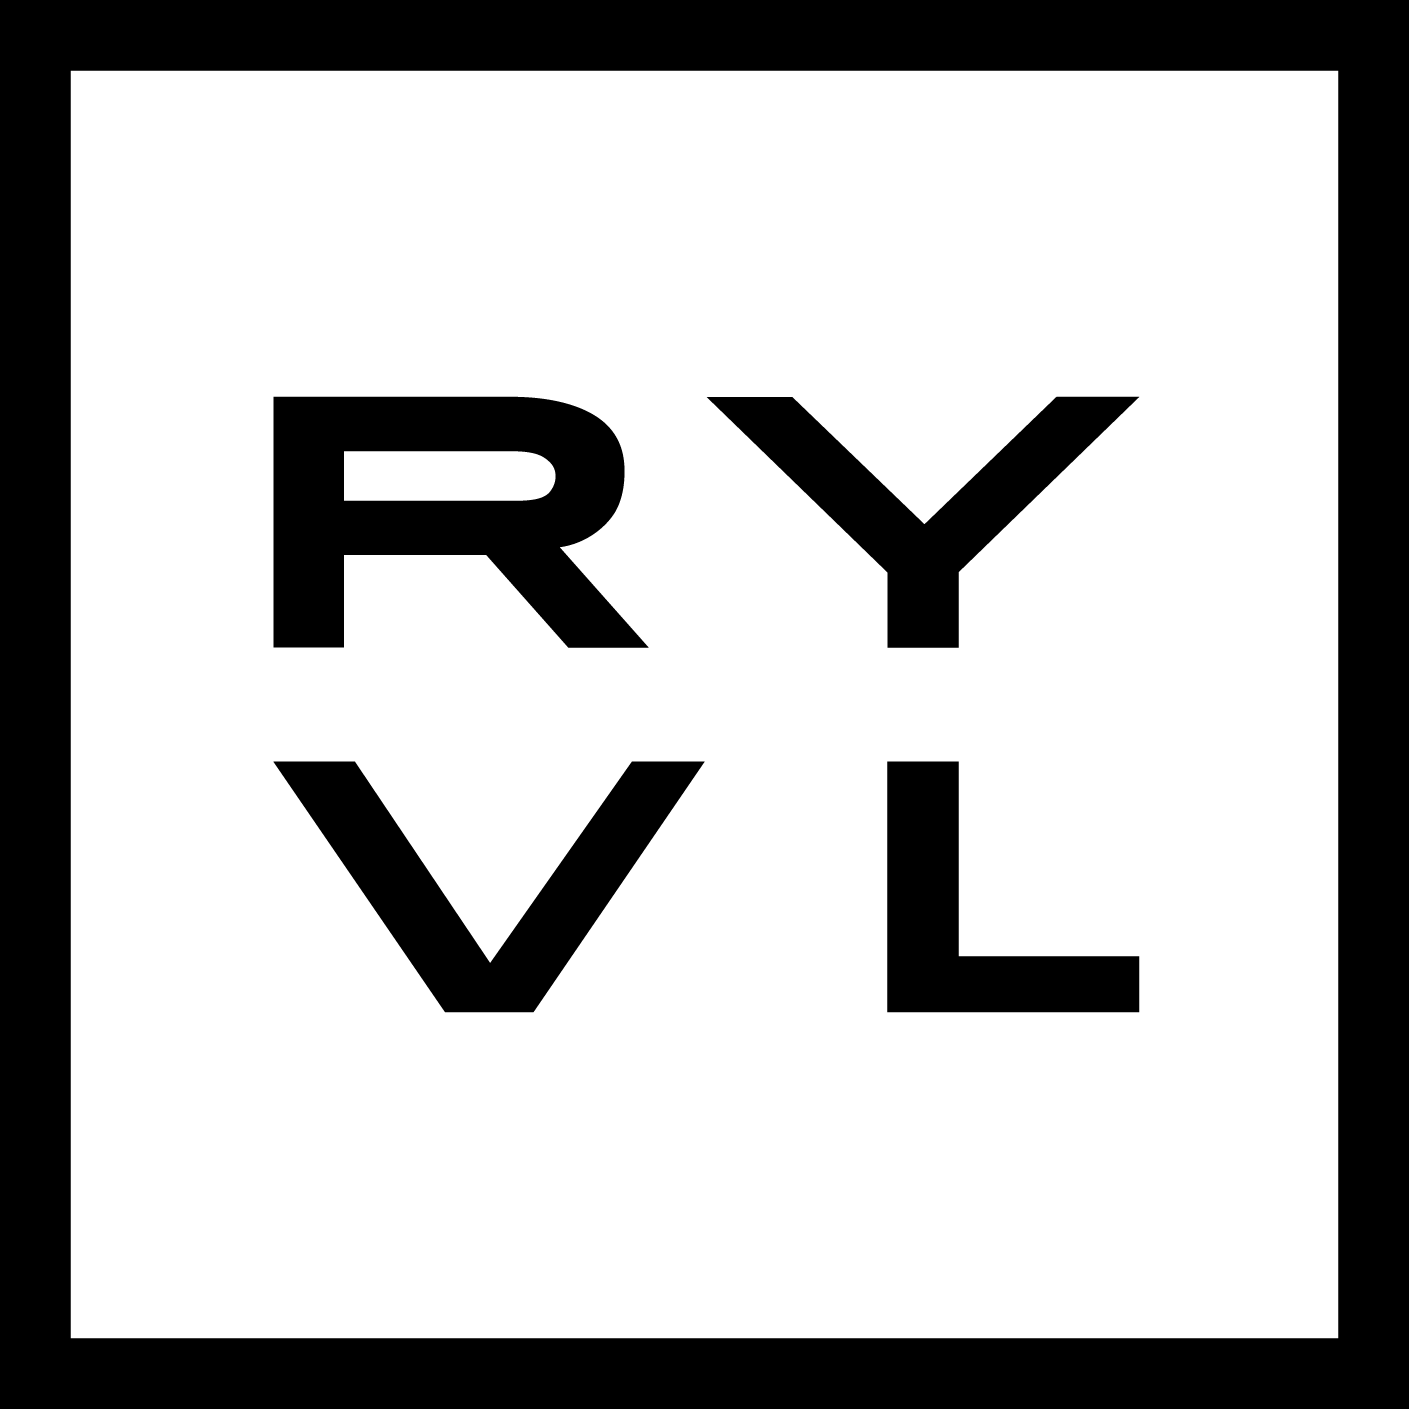 CompanyName VL Logo - The Marketing Group changes its name to RYVL in global rebrand ...